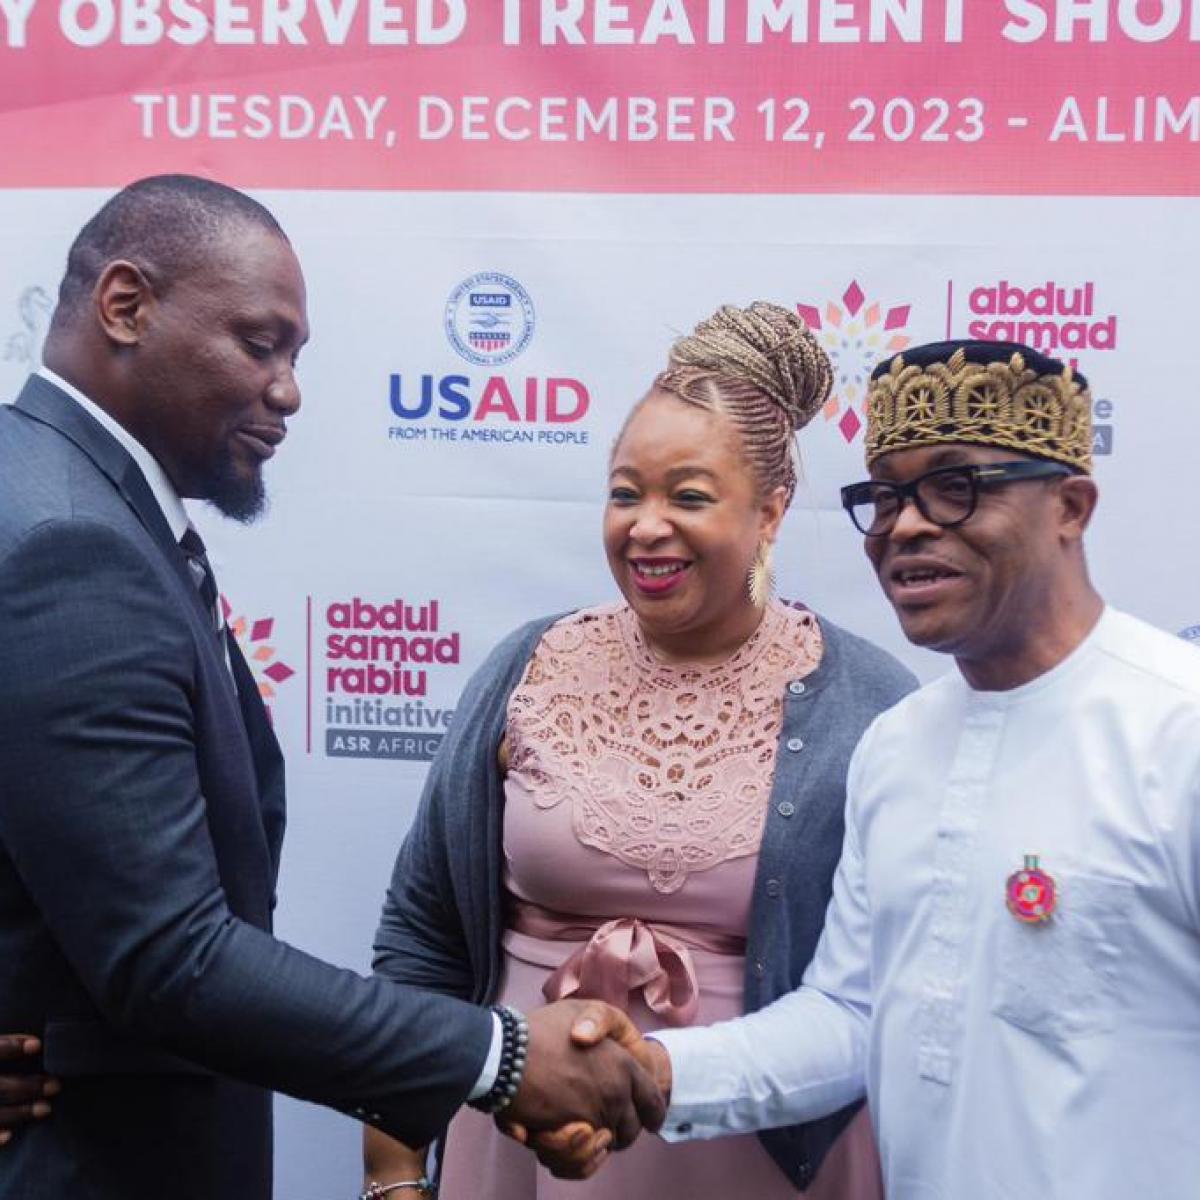 Joining Forces U.S. Government and Abdul Samad Rabiu Africa Initiative Partner in Fight against Tuberculosis